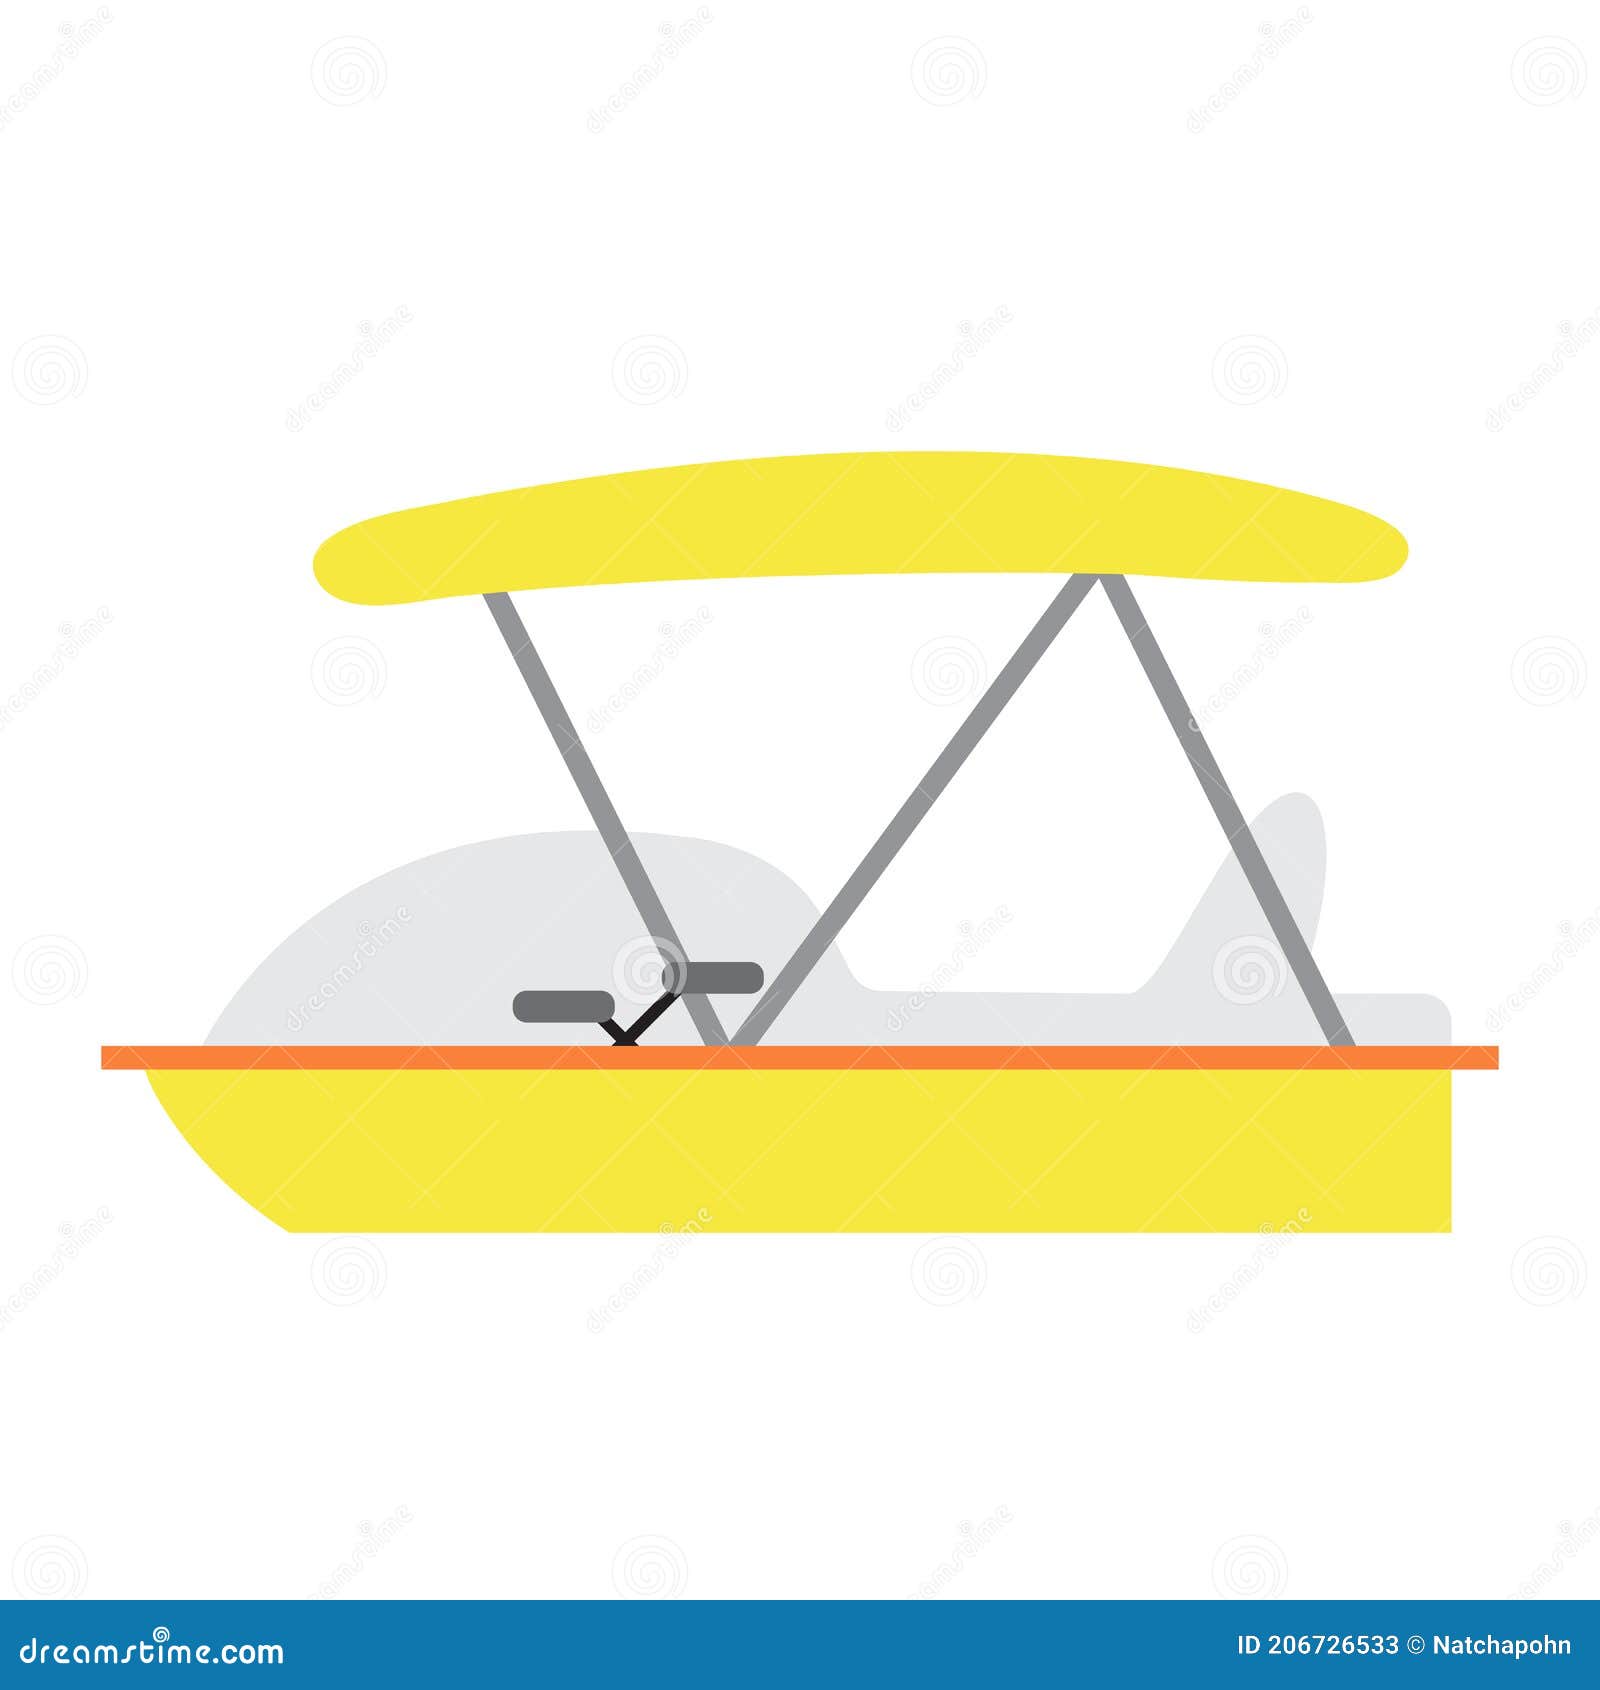 Pedalo Transportation Cartoon Character Perspective View Vector